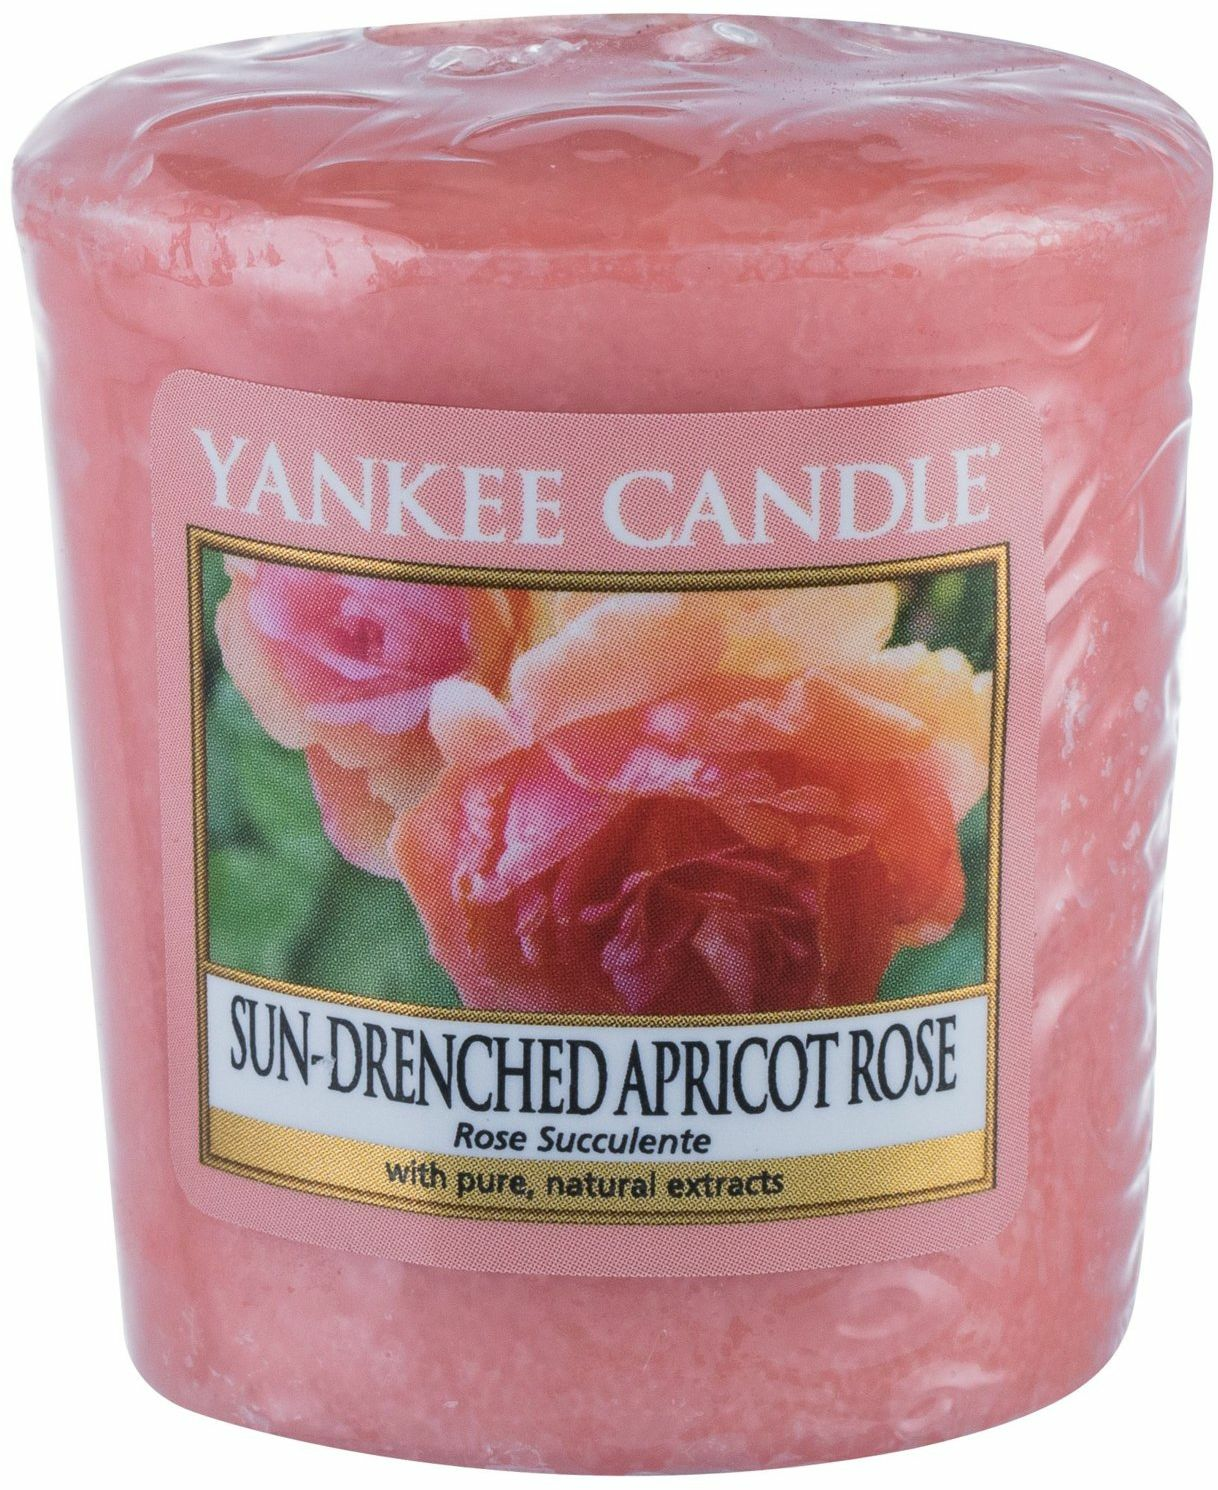 Yankee Candle Sun Drenched